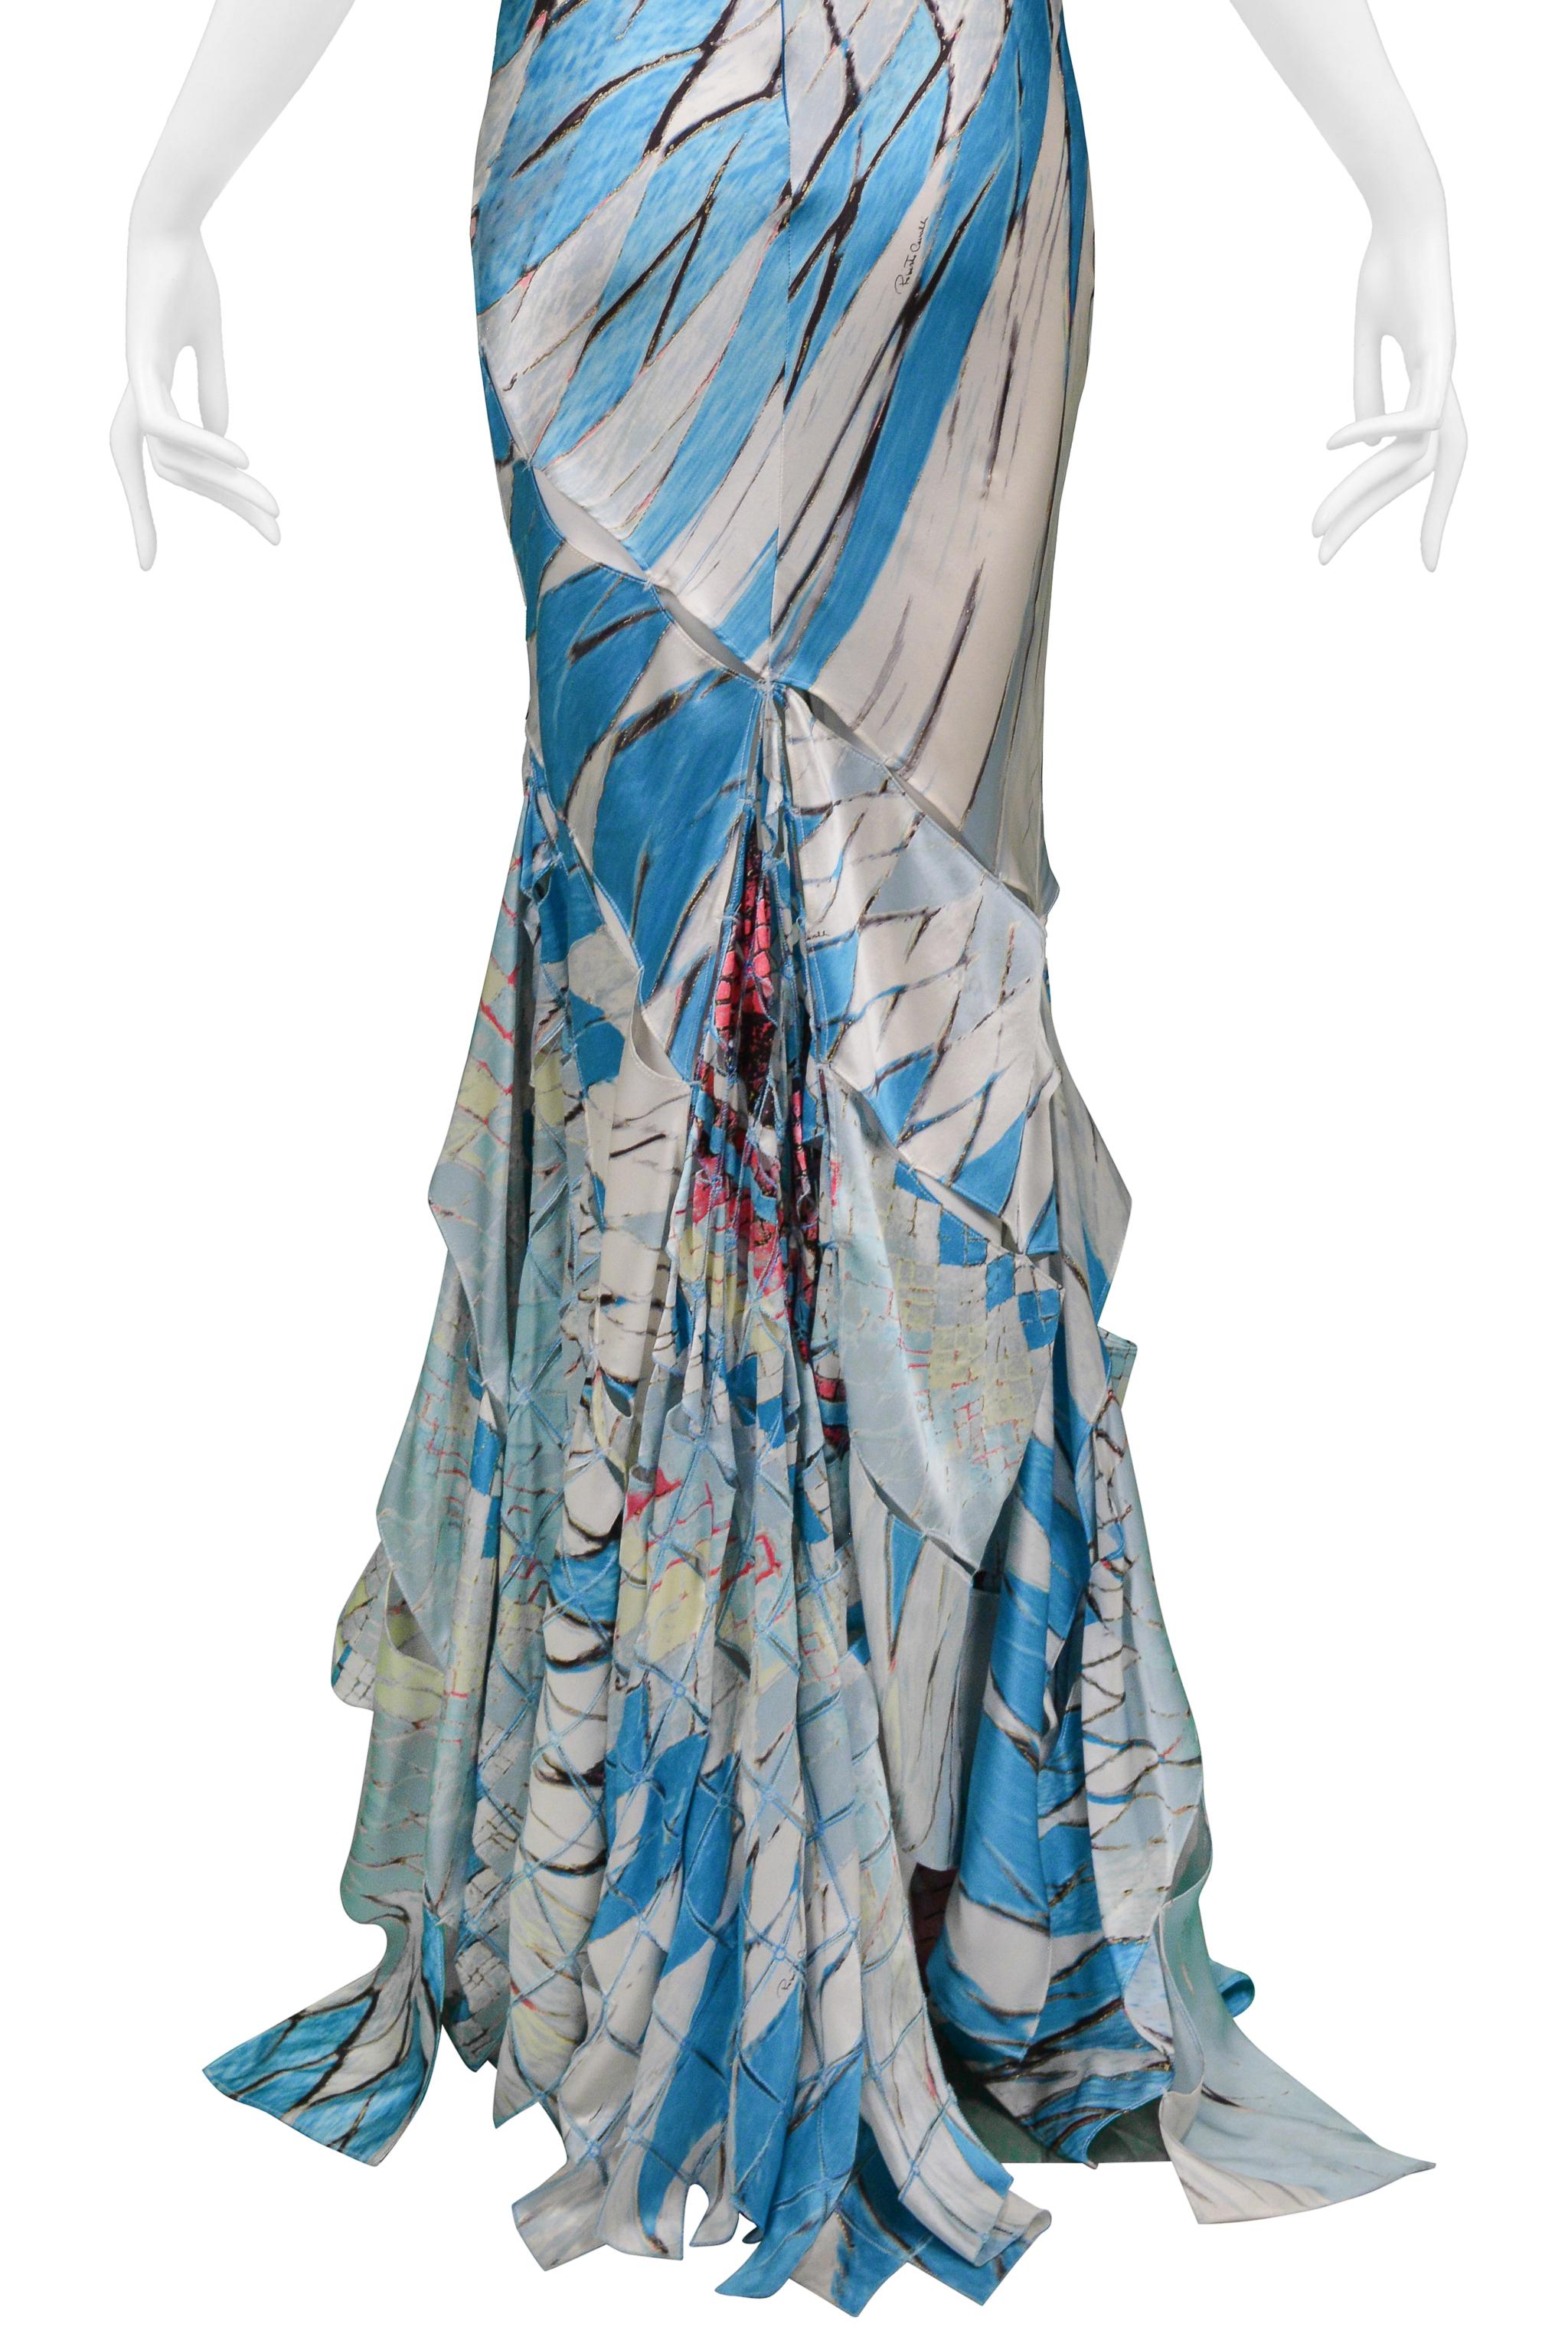 Roberto Cavalli Multicolor Stained Glass Print Gown With Cutout Slashes 2004 For Sale 5